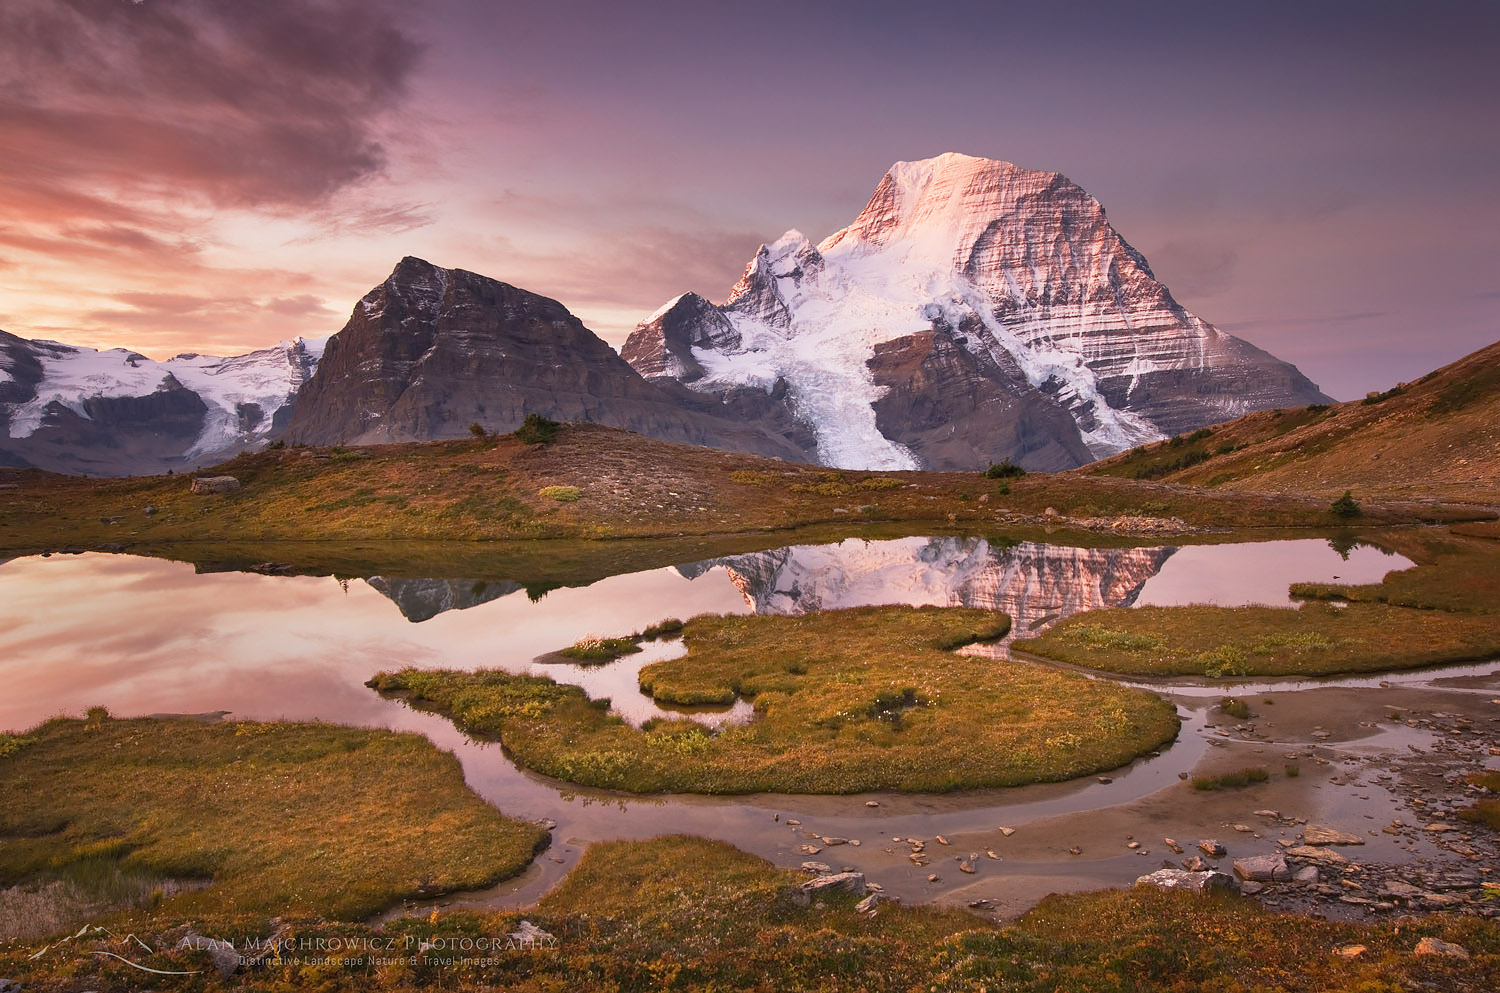 Sunrise over Mount Robson, seen from Mumm Basin, Mount Robson Provincial Park British Columbia #54613